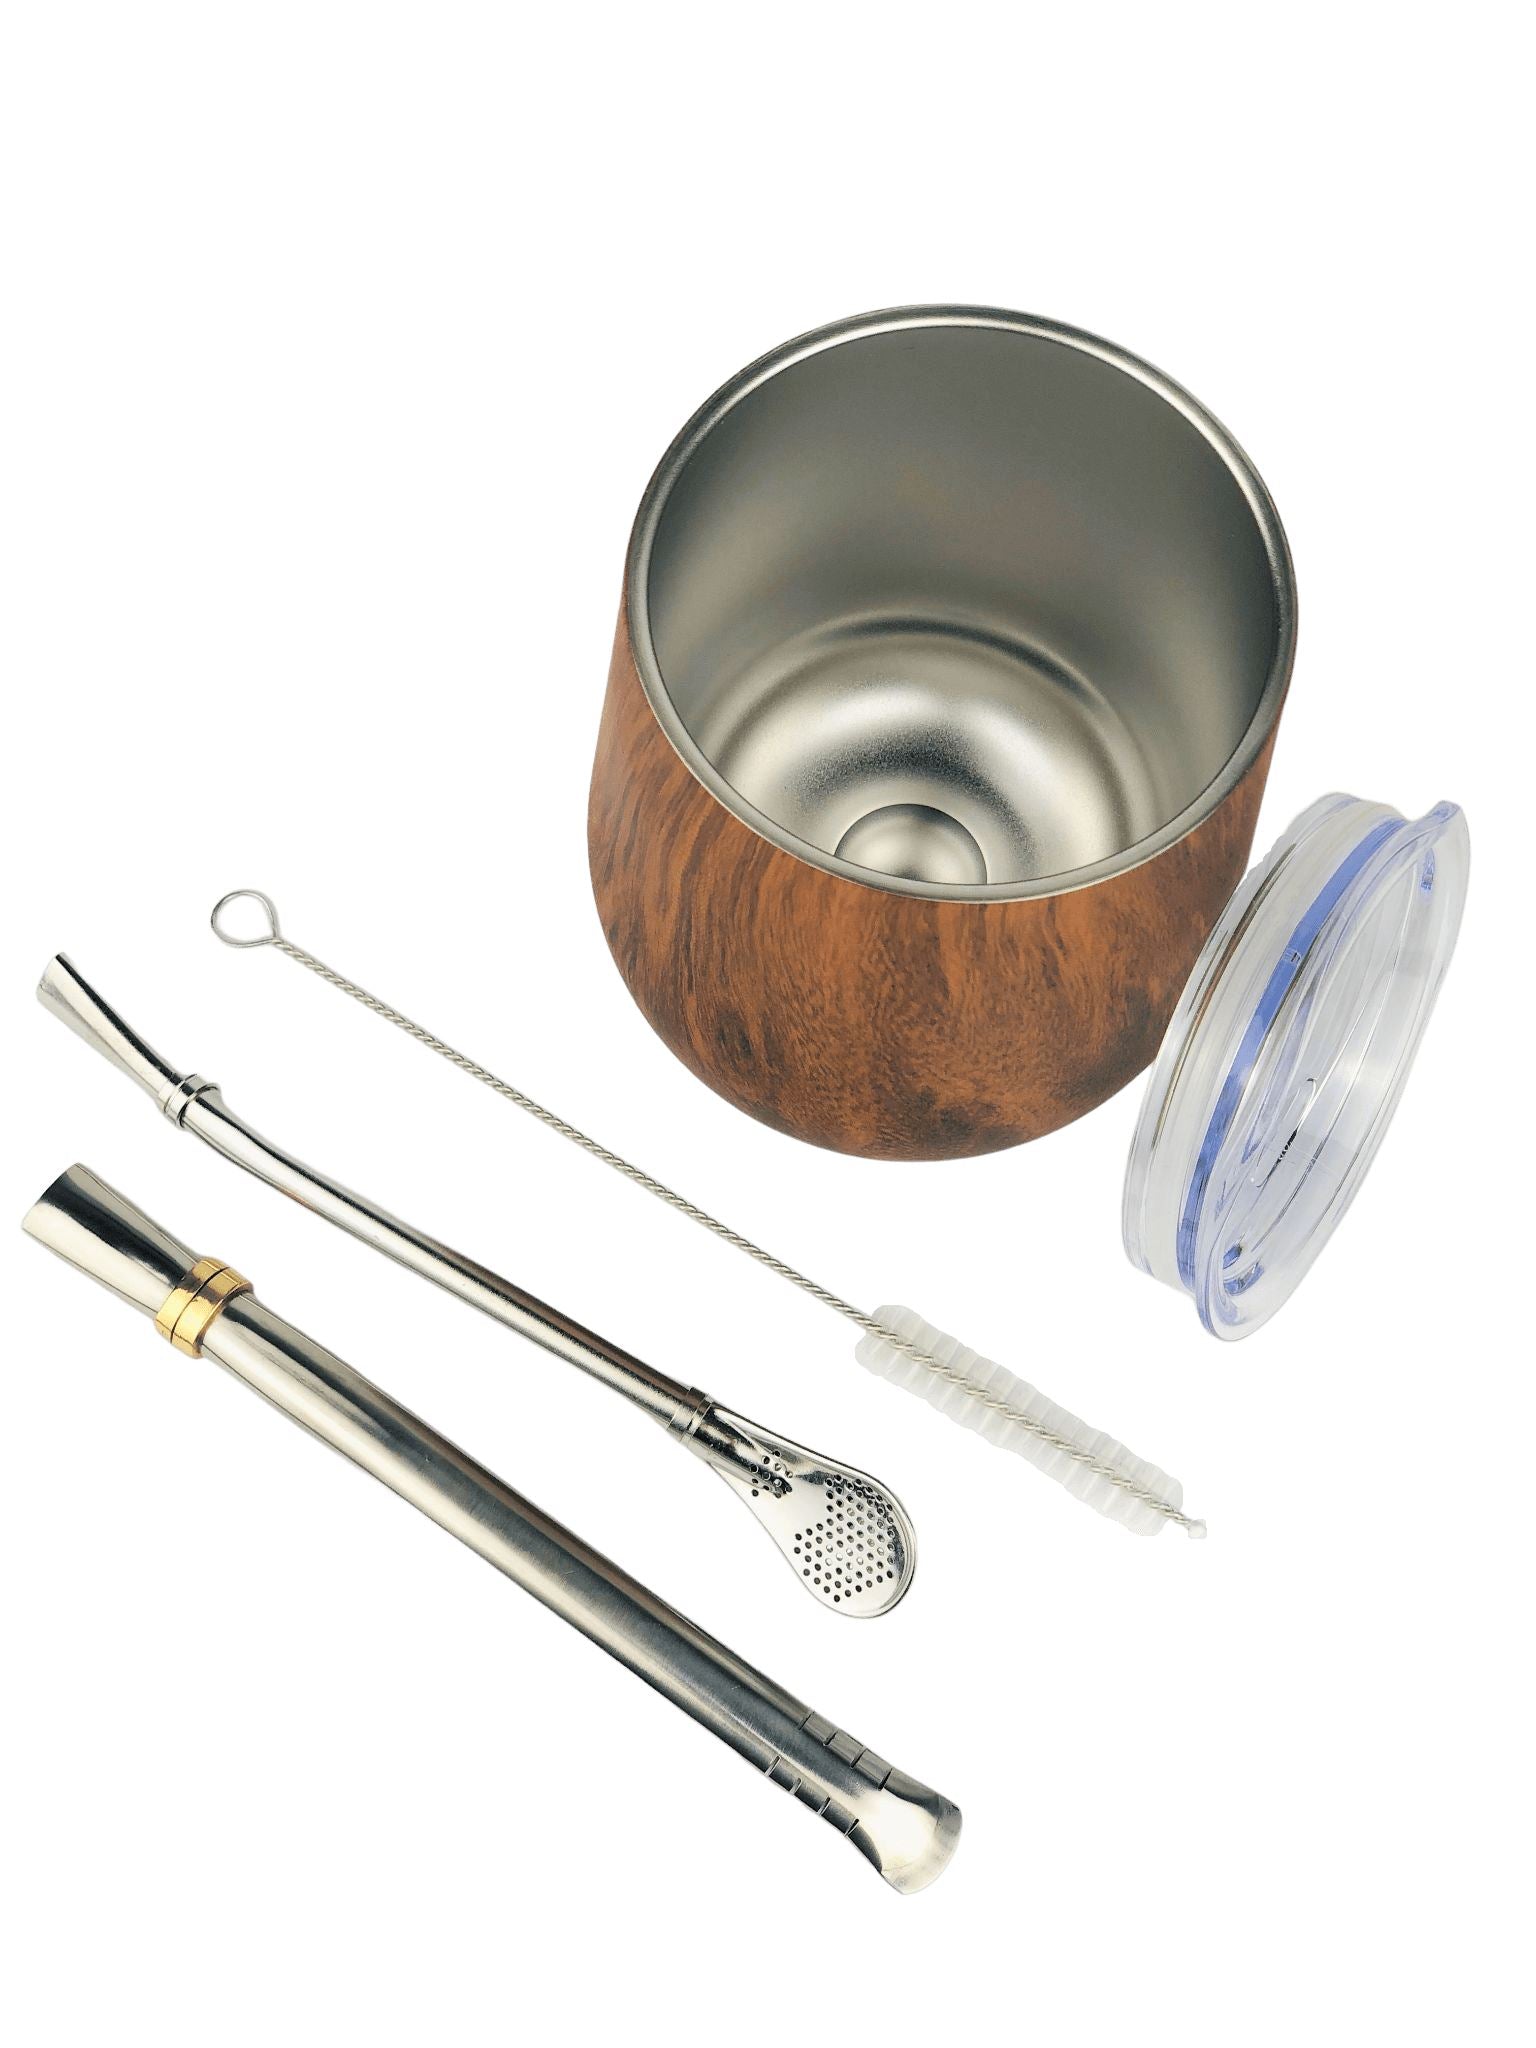 SSteel Mate Gourd and Straws Set - Wood (Mate and bombillas) Mates Hispanic Pantry 